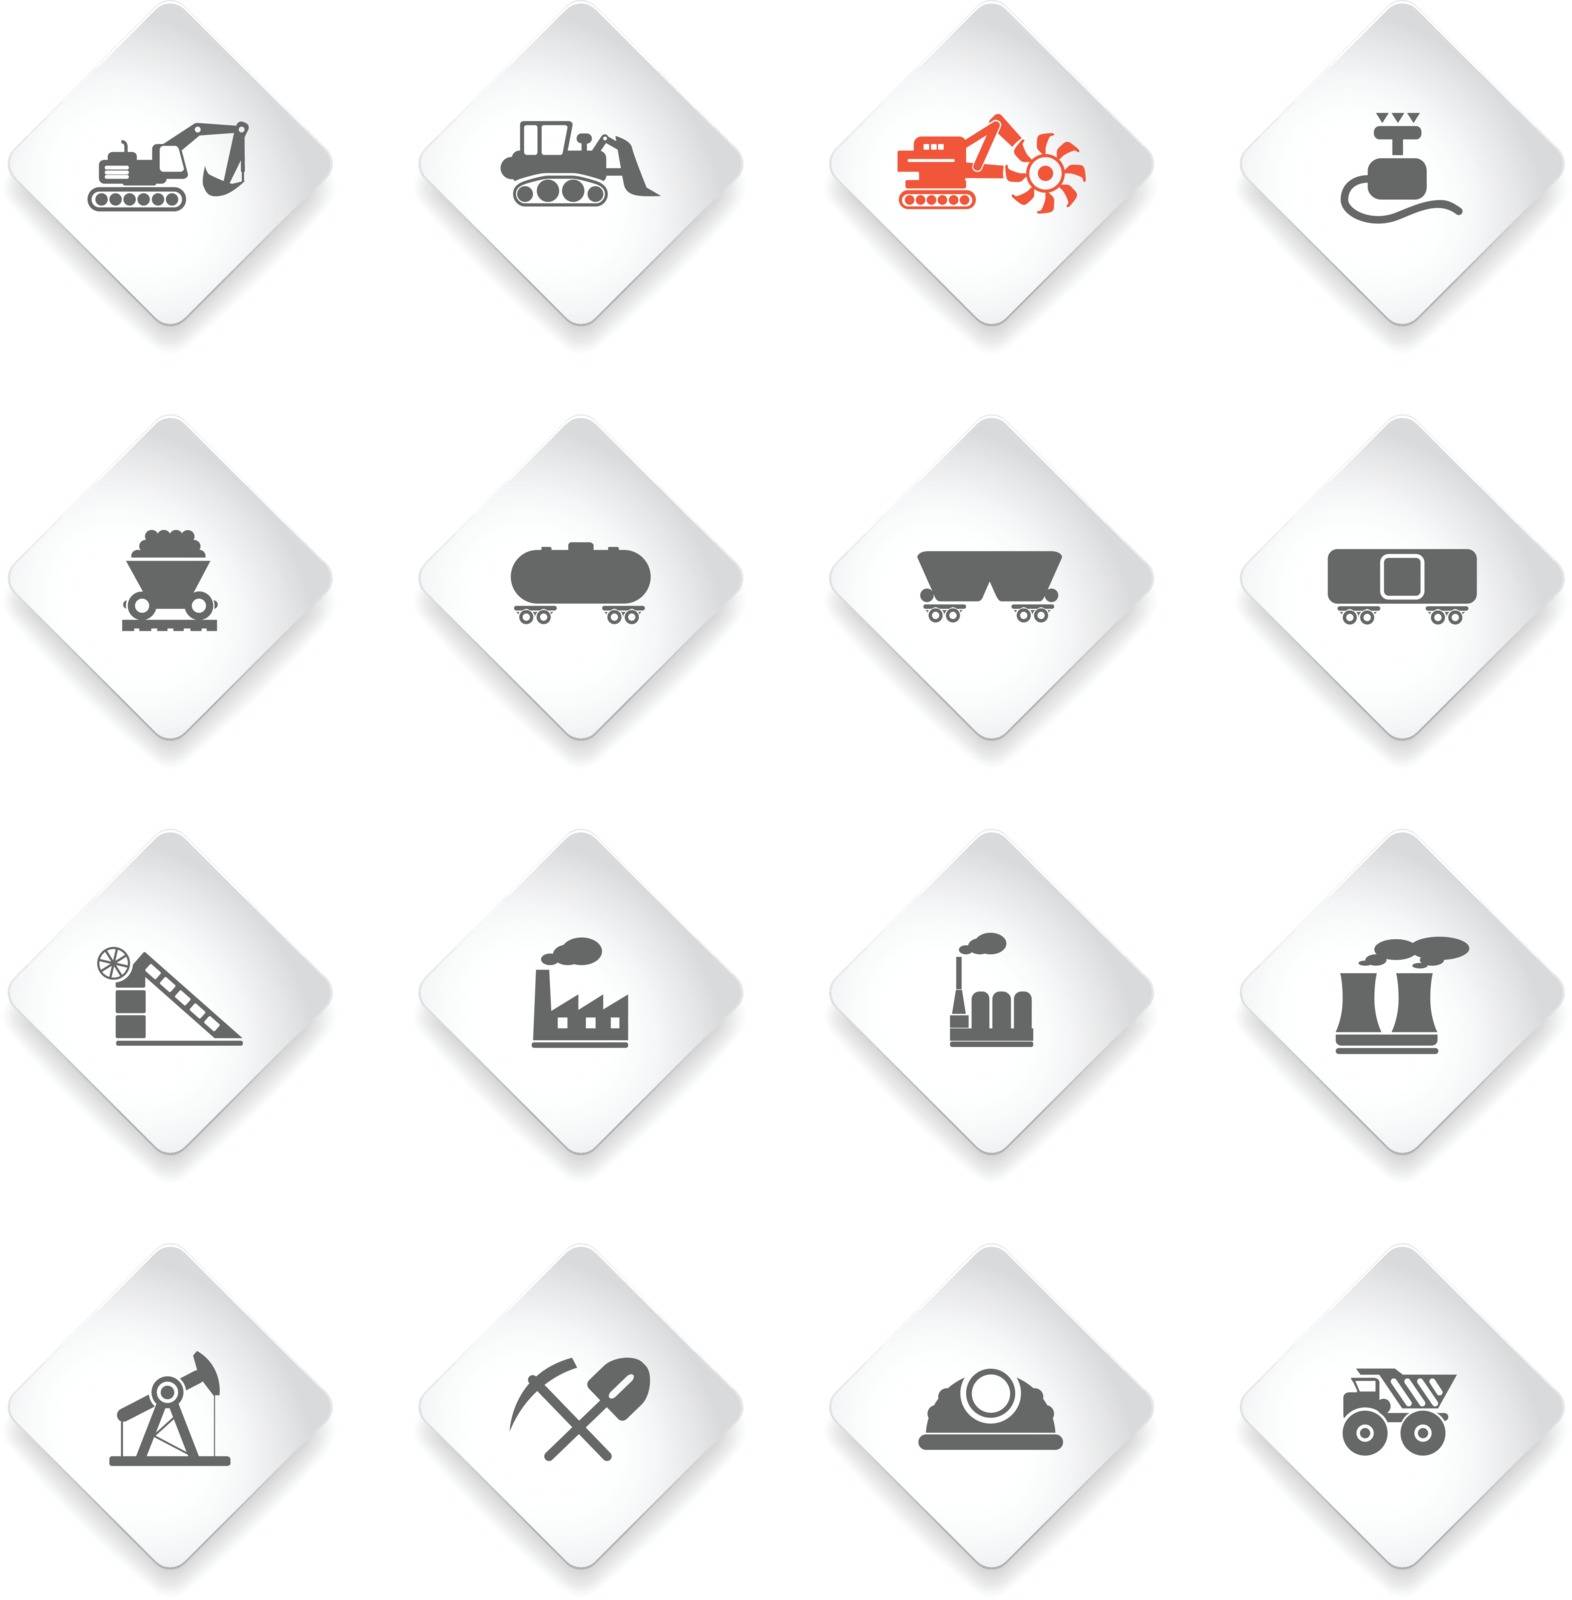 Factory and Industry  simply symbols for web and user interface